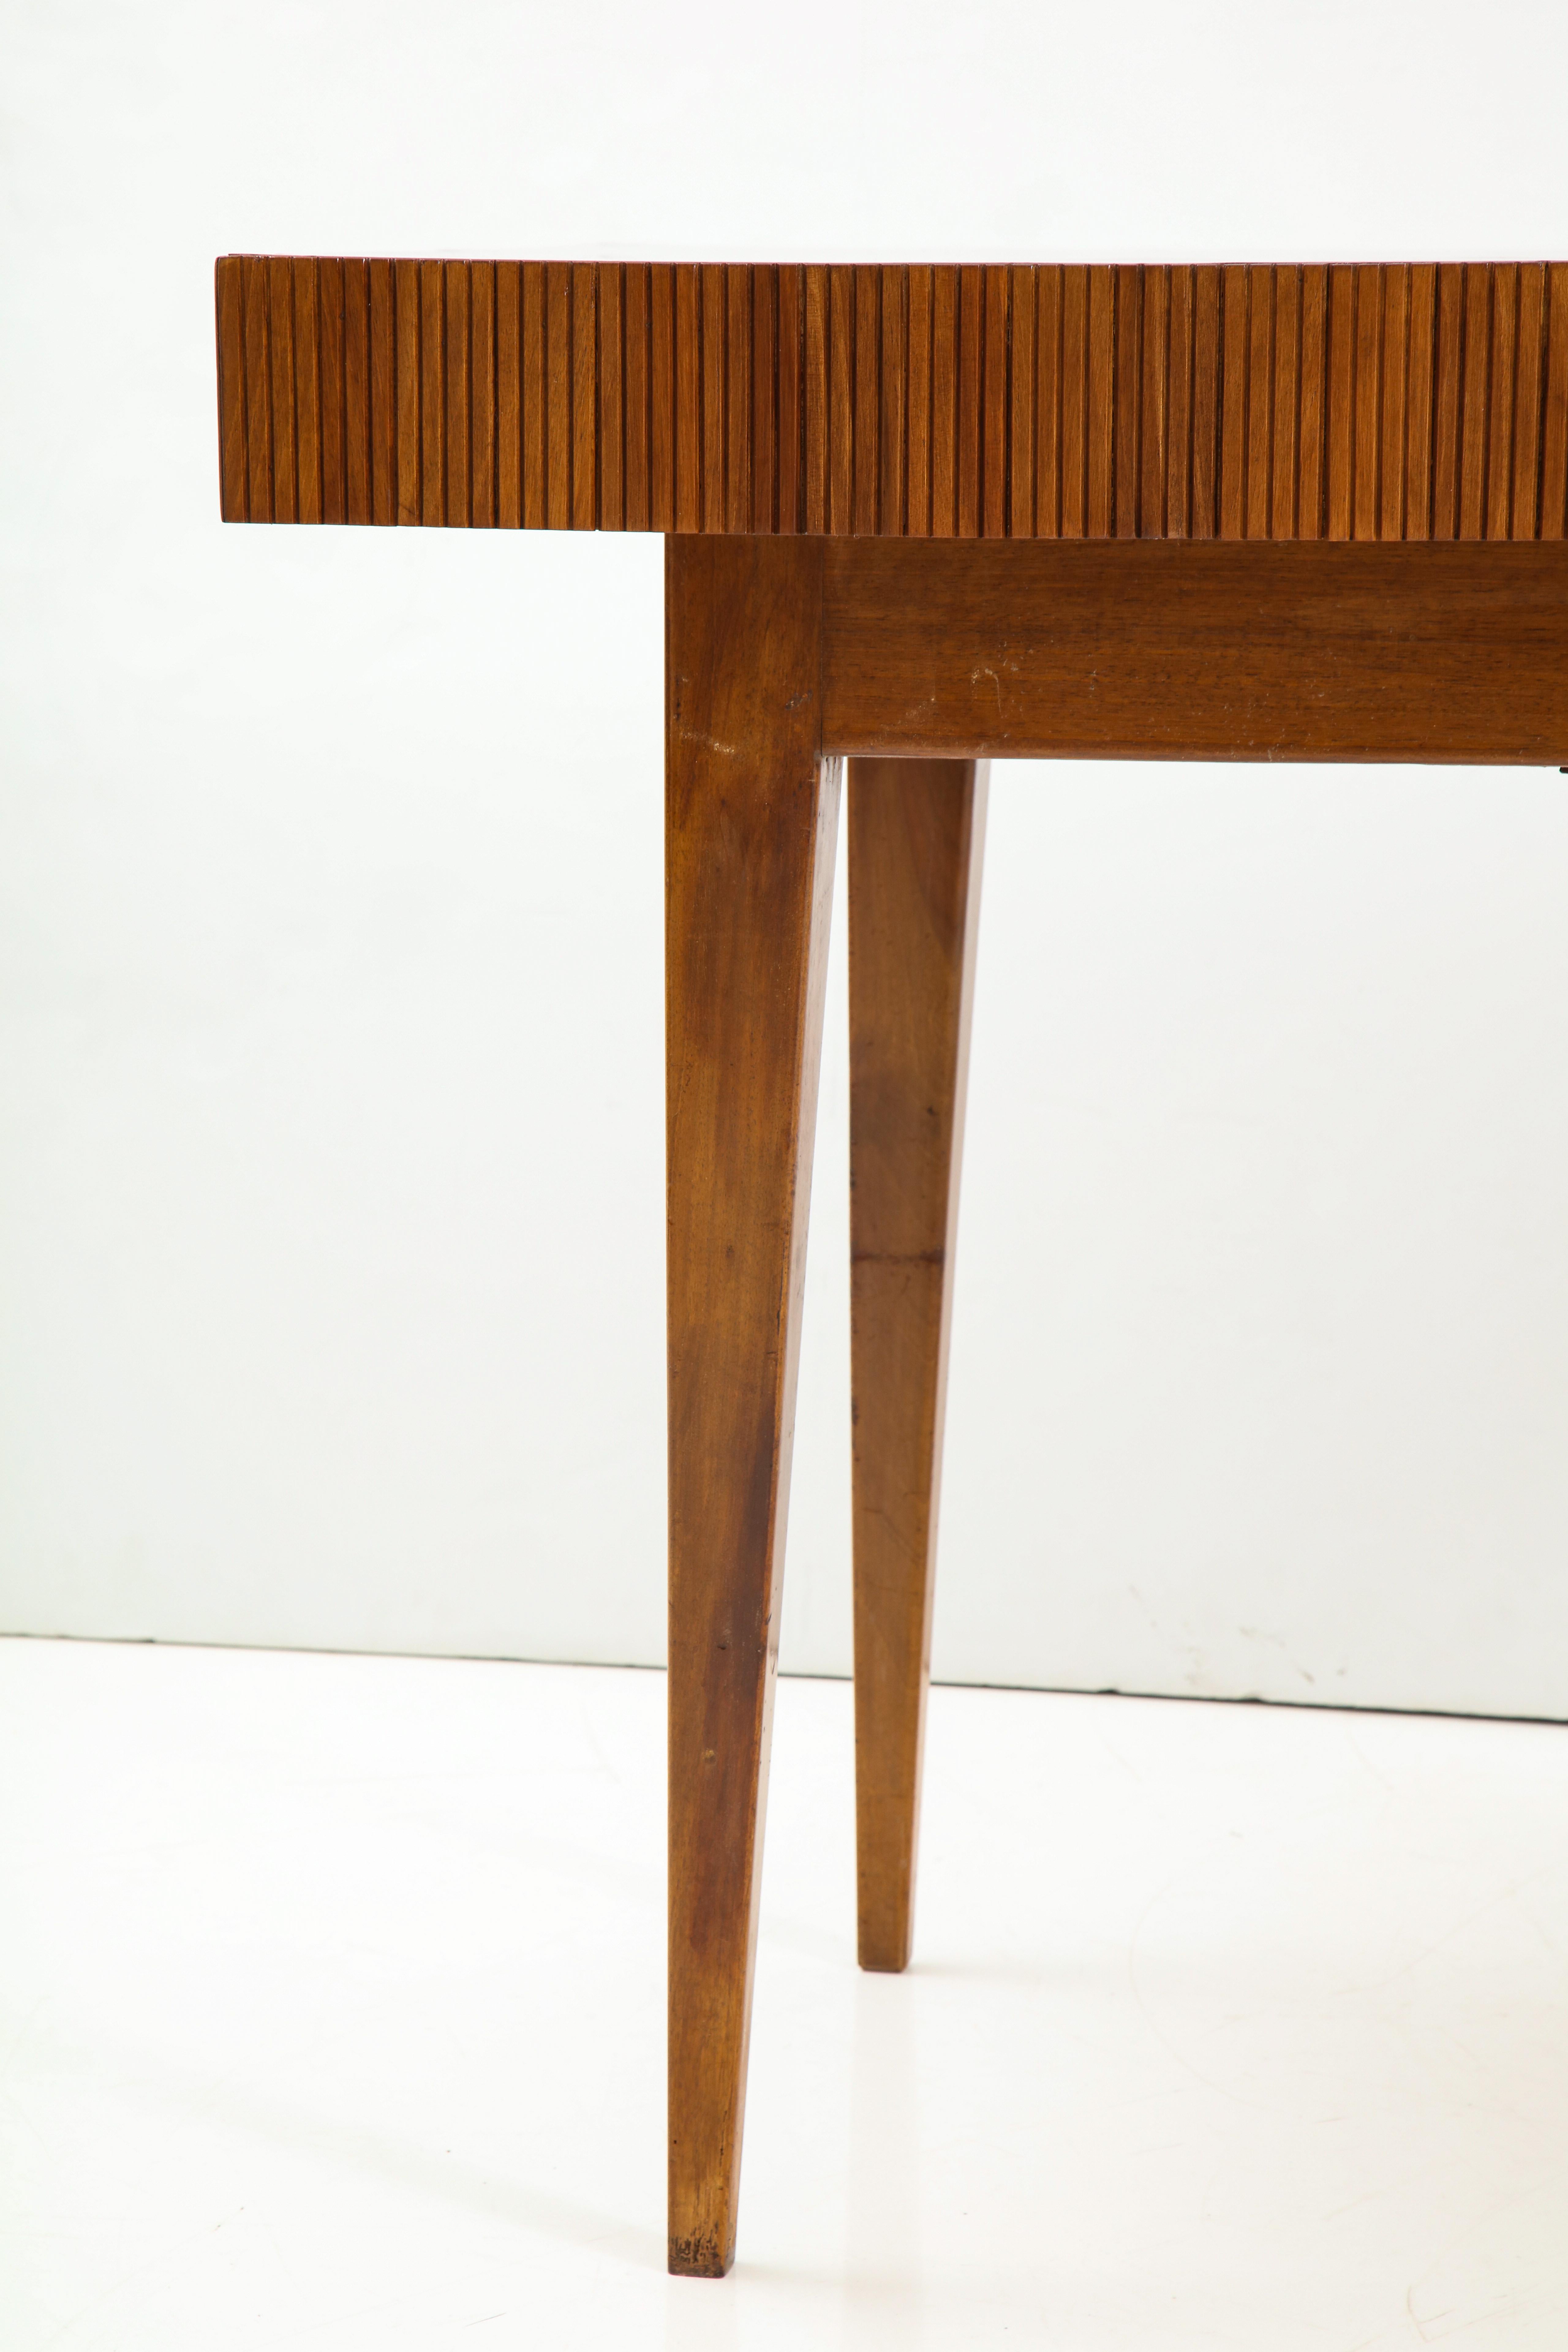 Italian Walnut Table with Single Drawer and Tapered Legs, Style of Gio Ponti 5